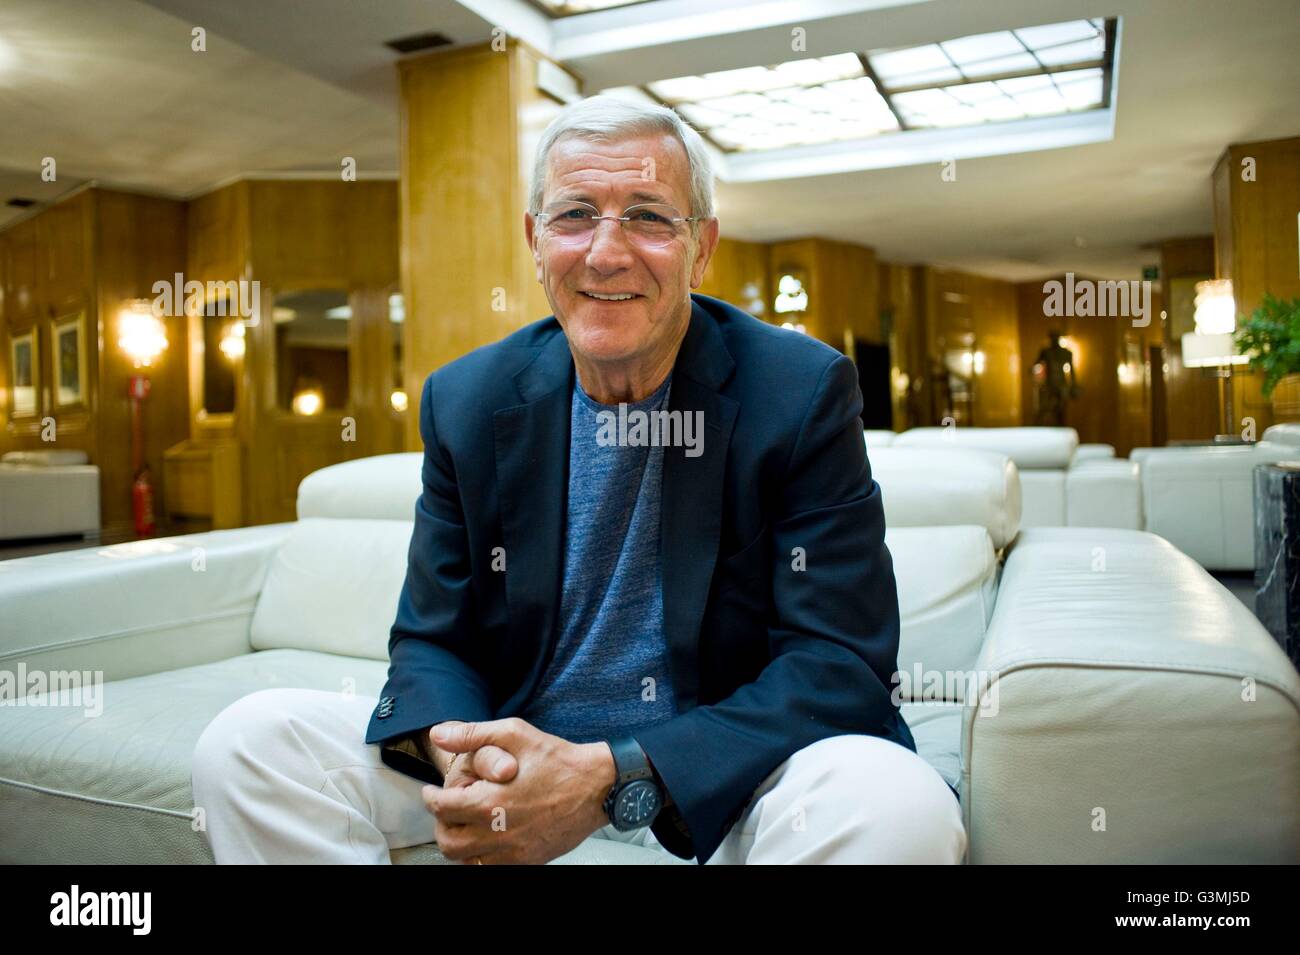 01.06.2016. Rome, Italy: Marcello Lippi, Italian World Cup-winning former professional football manager and player. He served as Italian national team head coach from 16 July 2004 to 12 July 2006 and led Italy to win the 2006 FIFA World Cup. Stock Photo